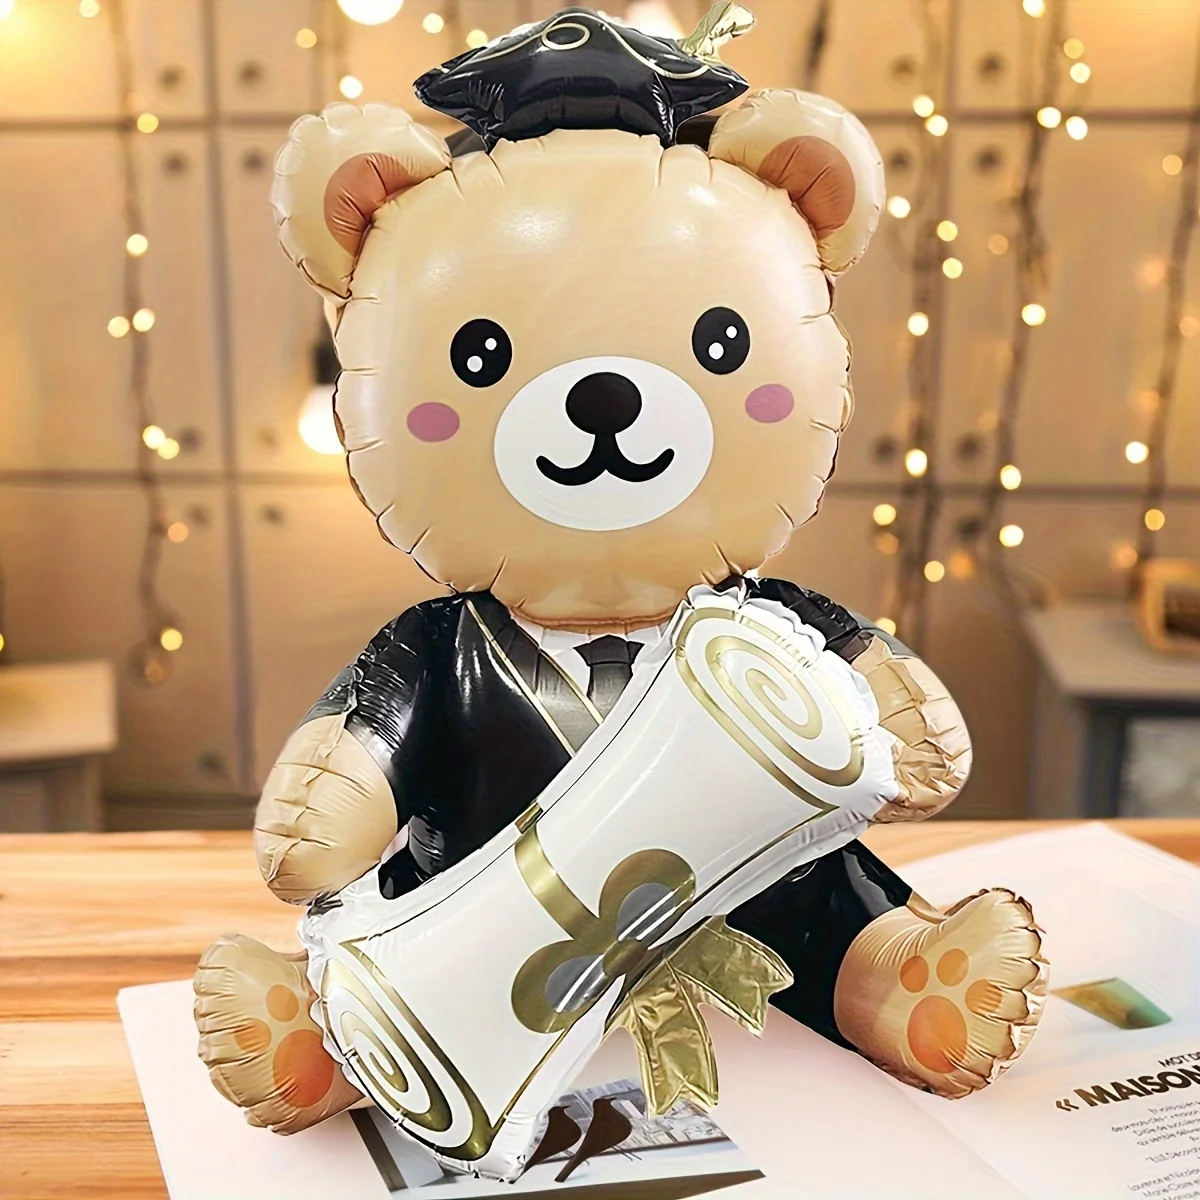 1pc Cute Holding Graduation Bear Aluminum Film Balloon, Graduation Party Balloon Perfect For School Events And Campus Decoration